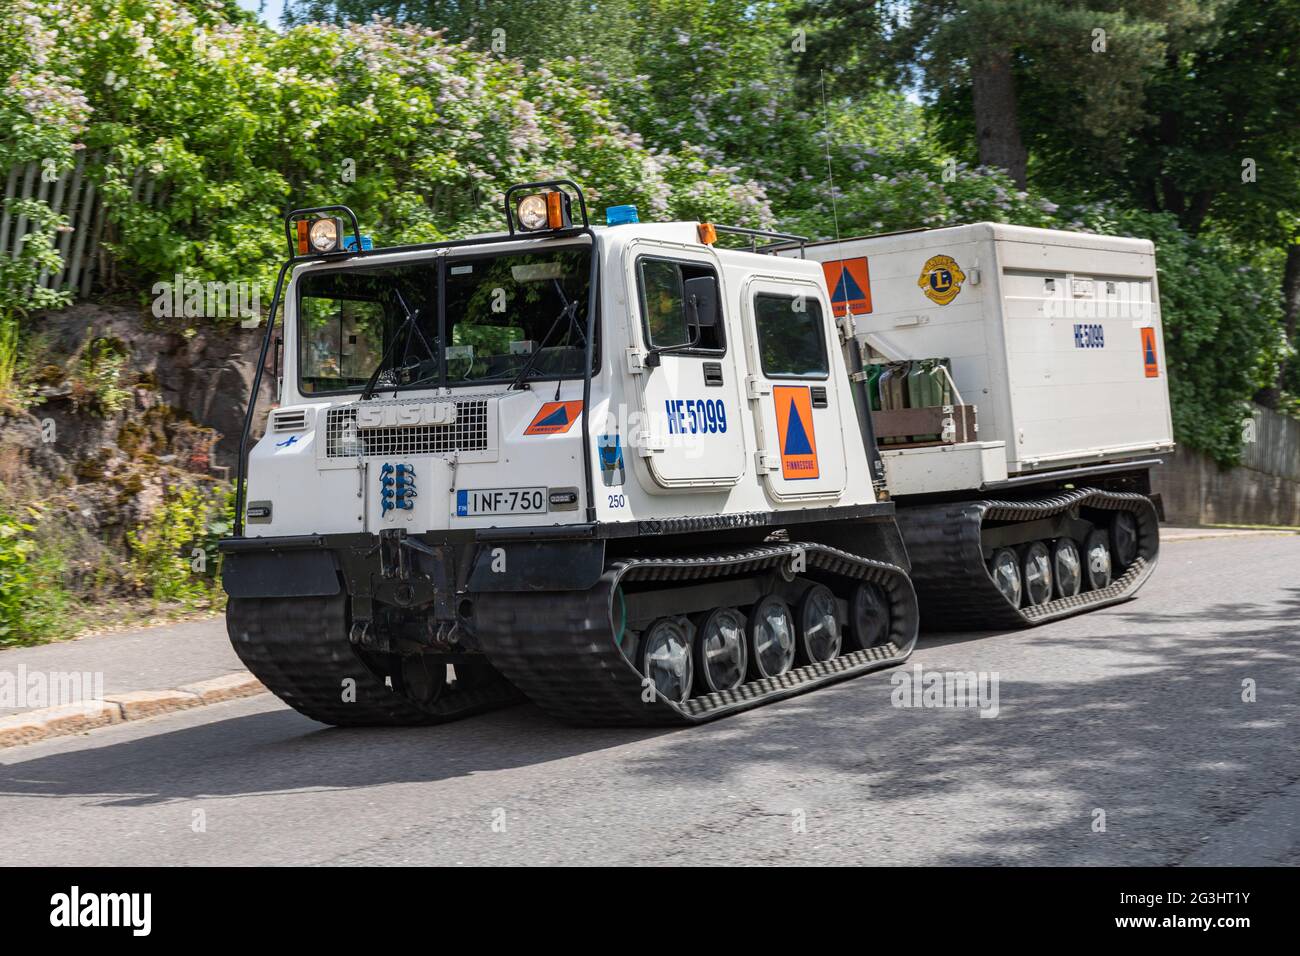 Sisu tracked high-mobility vehicle of Helsinki City Rescue Department in Meilahti district of Helsinki, Finland Stock Photo